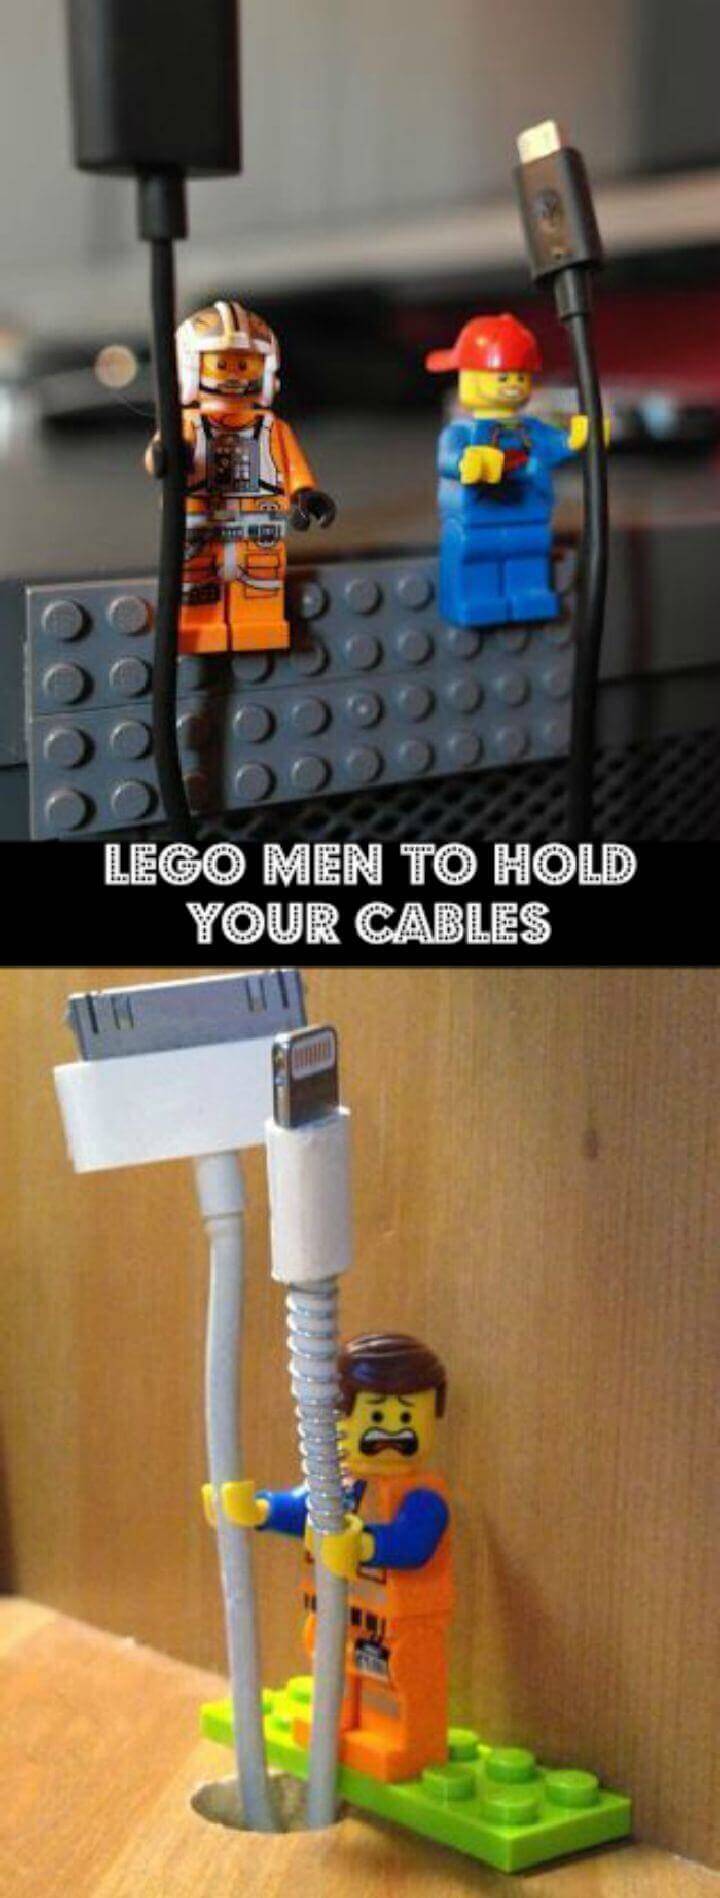 Lego men to hold your cables